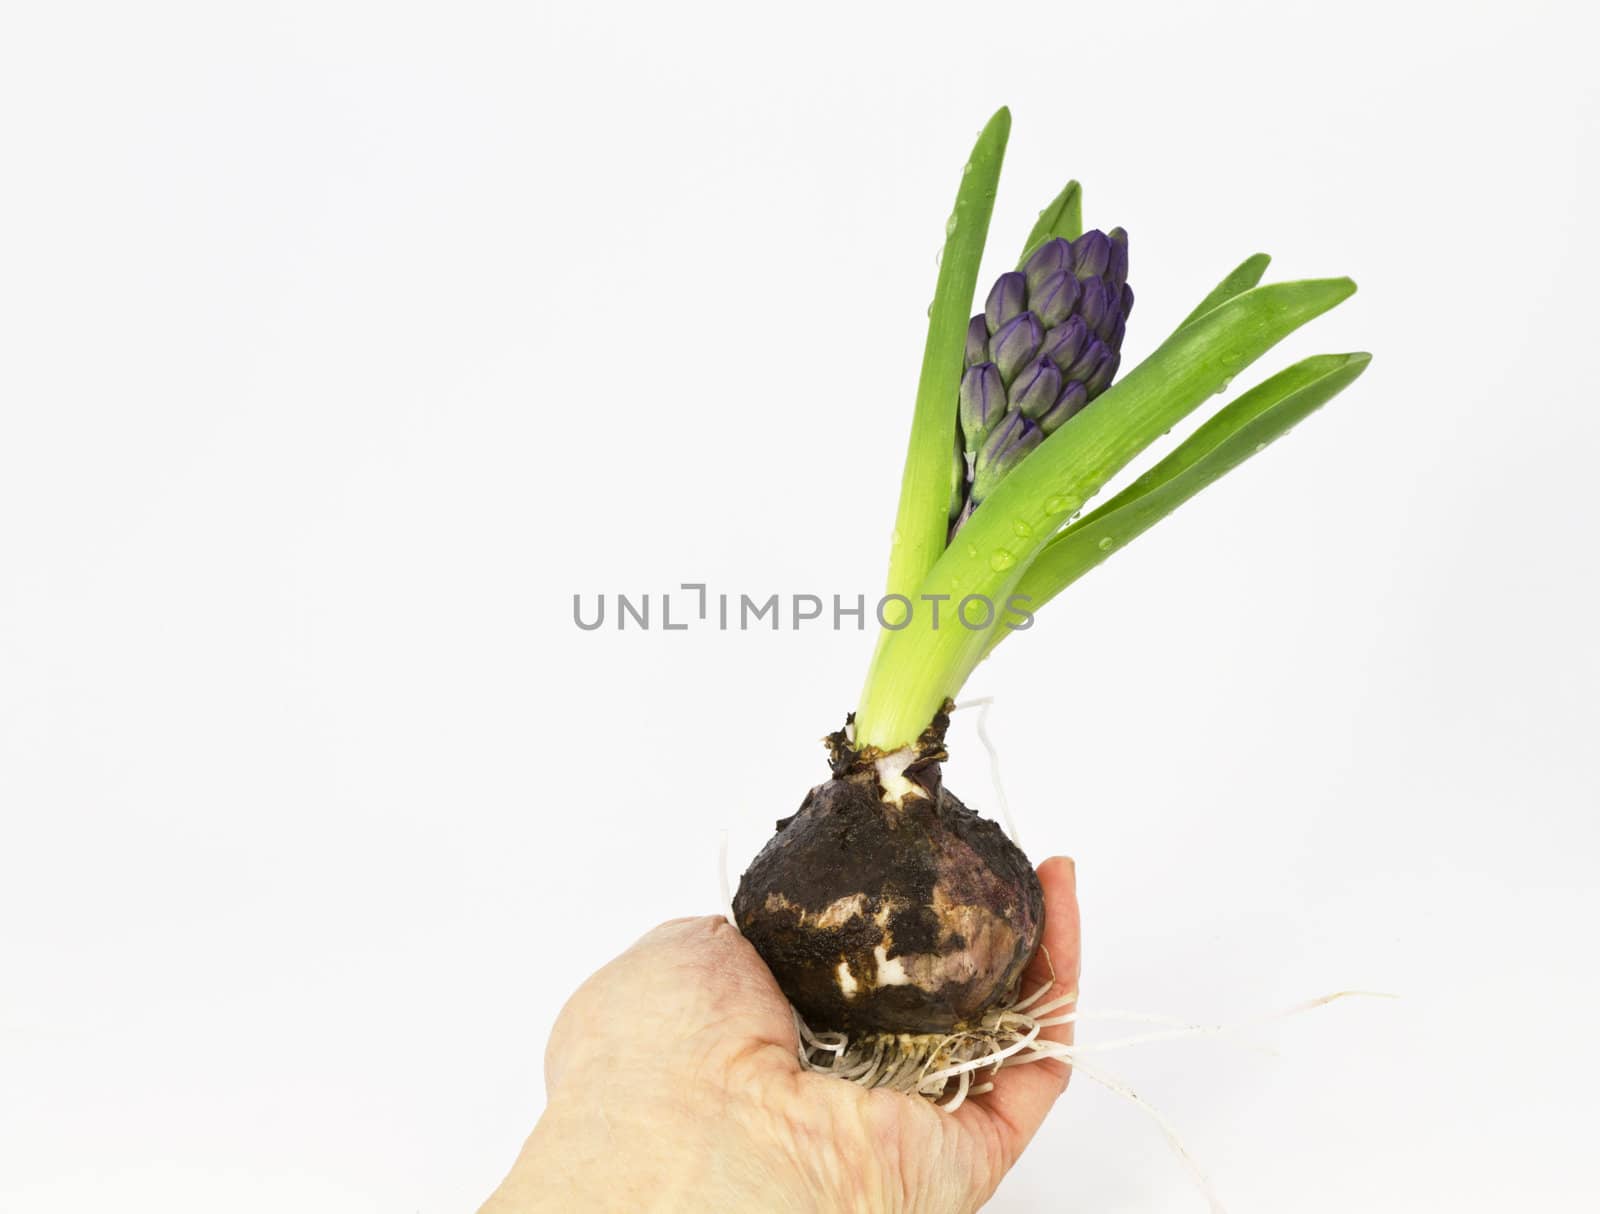 Hyacinth bulb held in hand with white background for copy space;